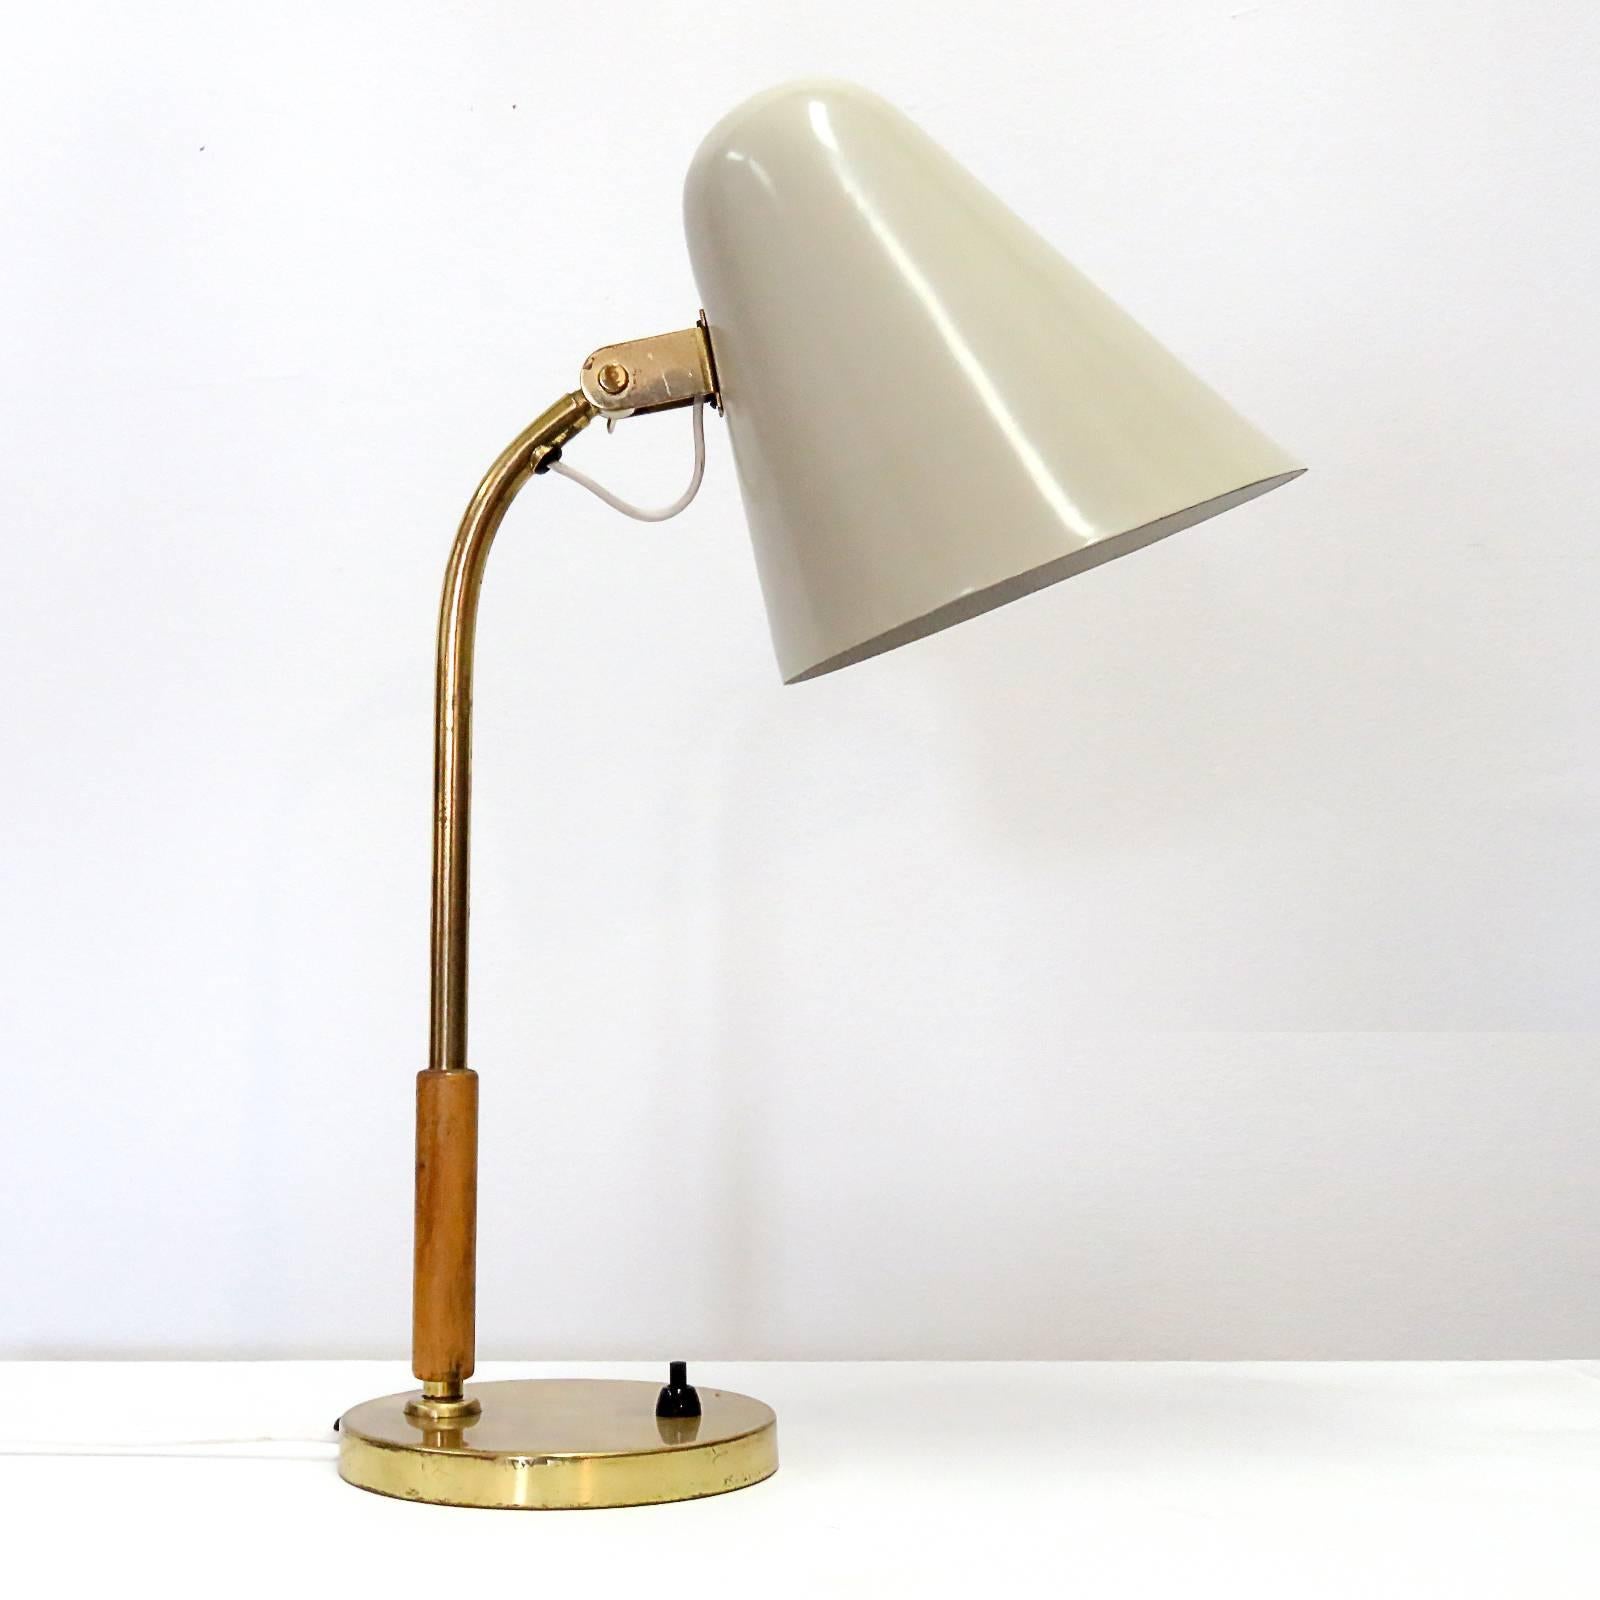 Wonderful desk lamp by Paavo Tynell for Taito, Finland, with large articulate crème colored enameled shade, wooden handle and brass arm and base, signed OY Taito.